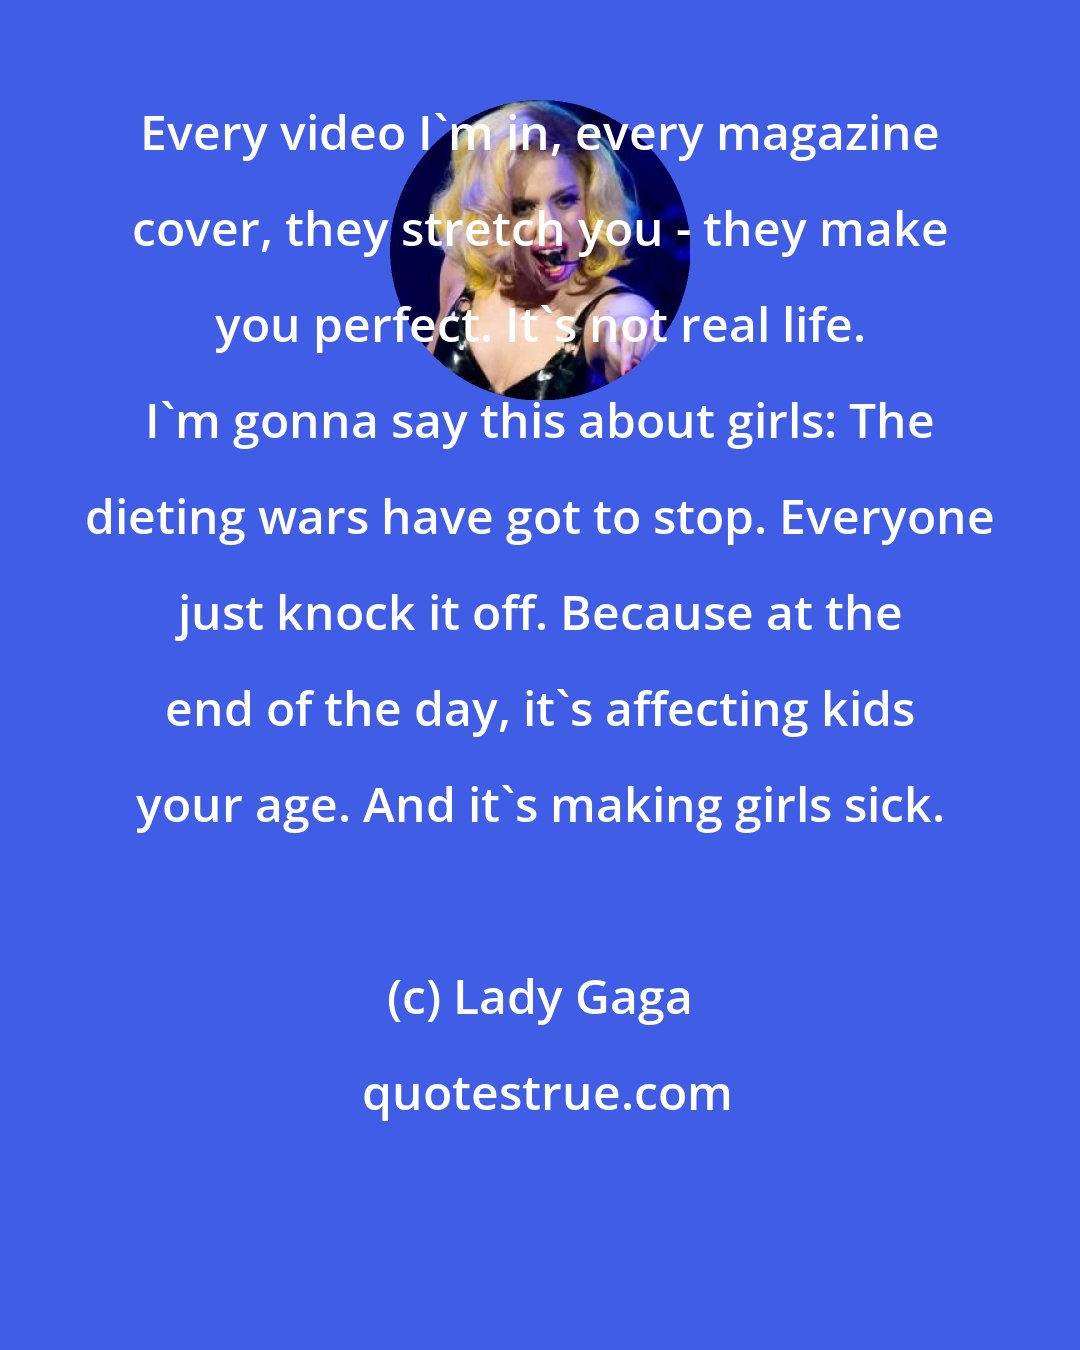 Lady Gaga: Every video I'm in, every magazine cover, they stretch you - they make you perfect. It's not real life. I'm gonna say this about girls: The dieting wars have got to stop. Everyone just knock it off. Because at the end of the day, it's affecting kids your age. And it's making girls sick.